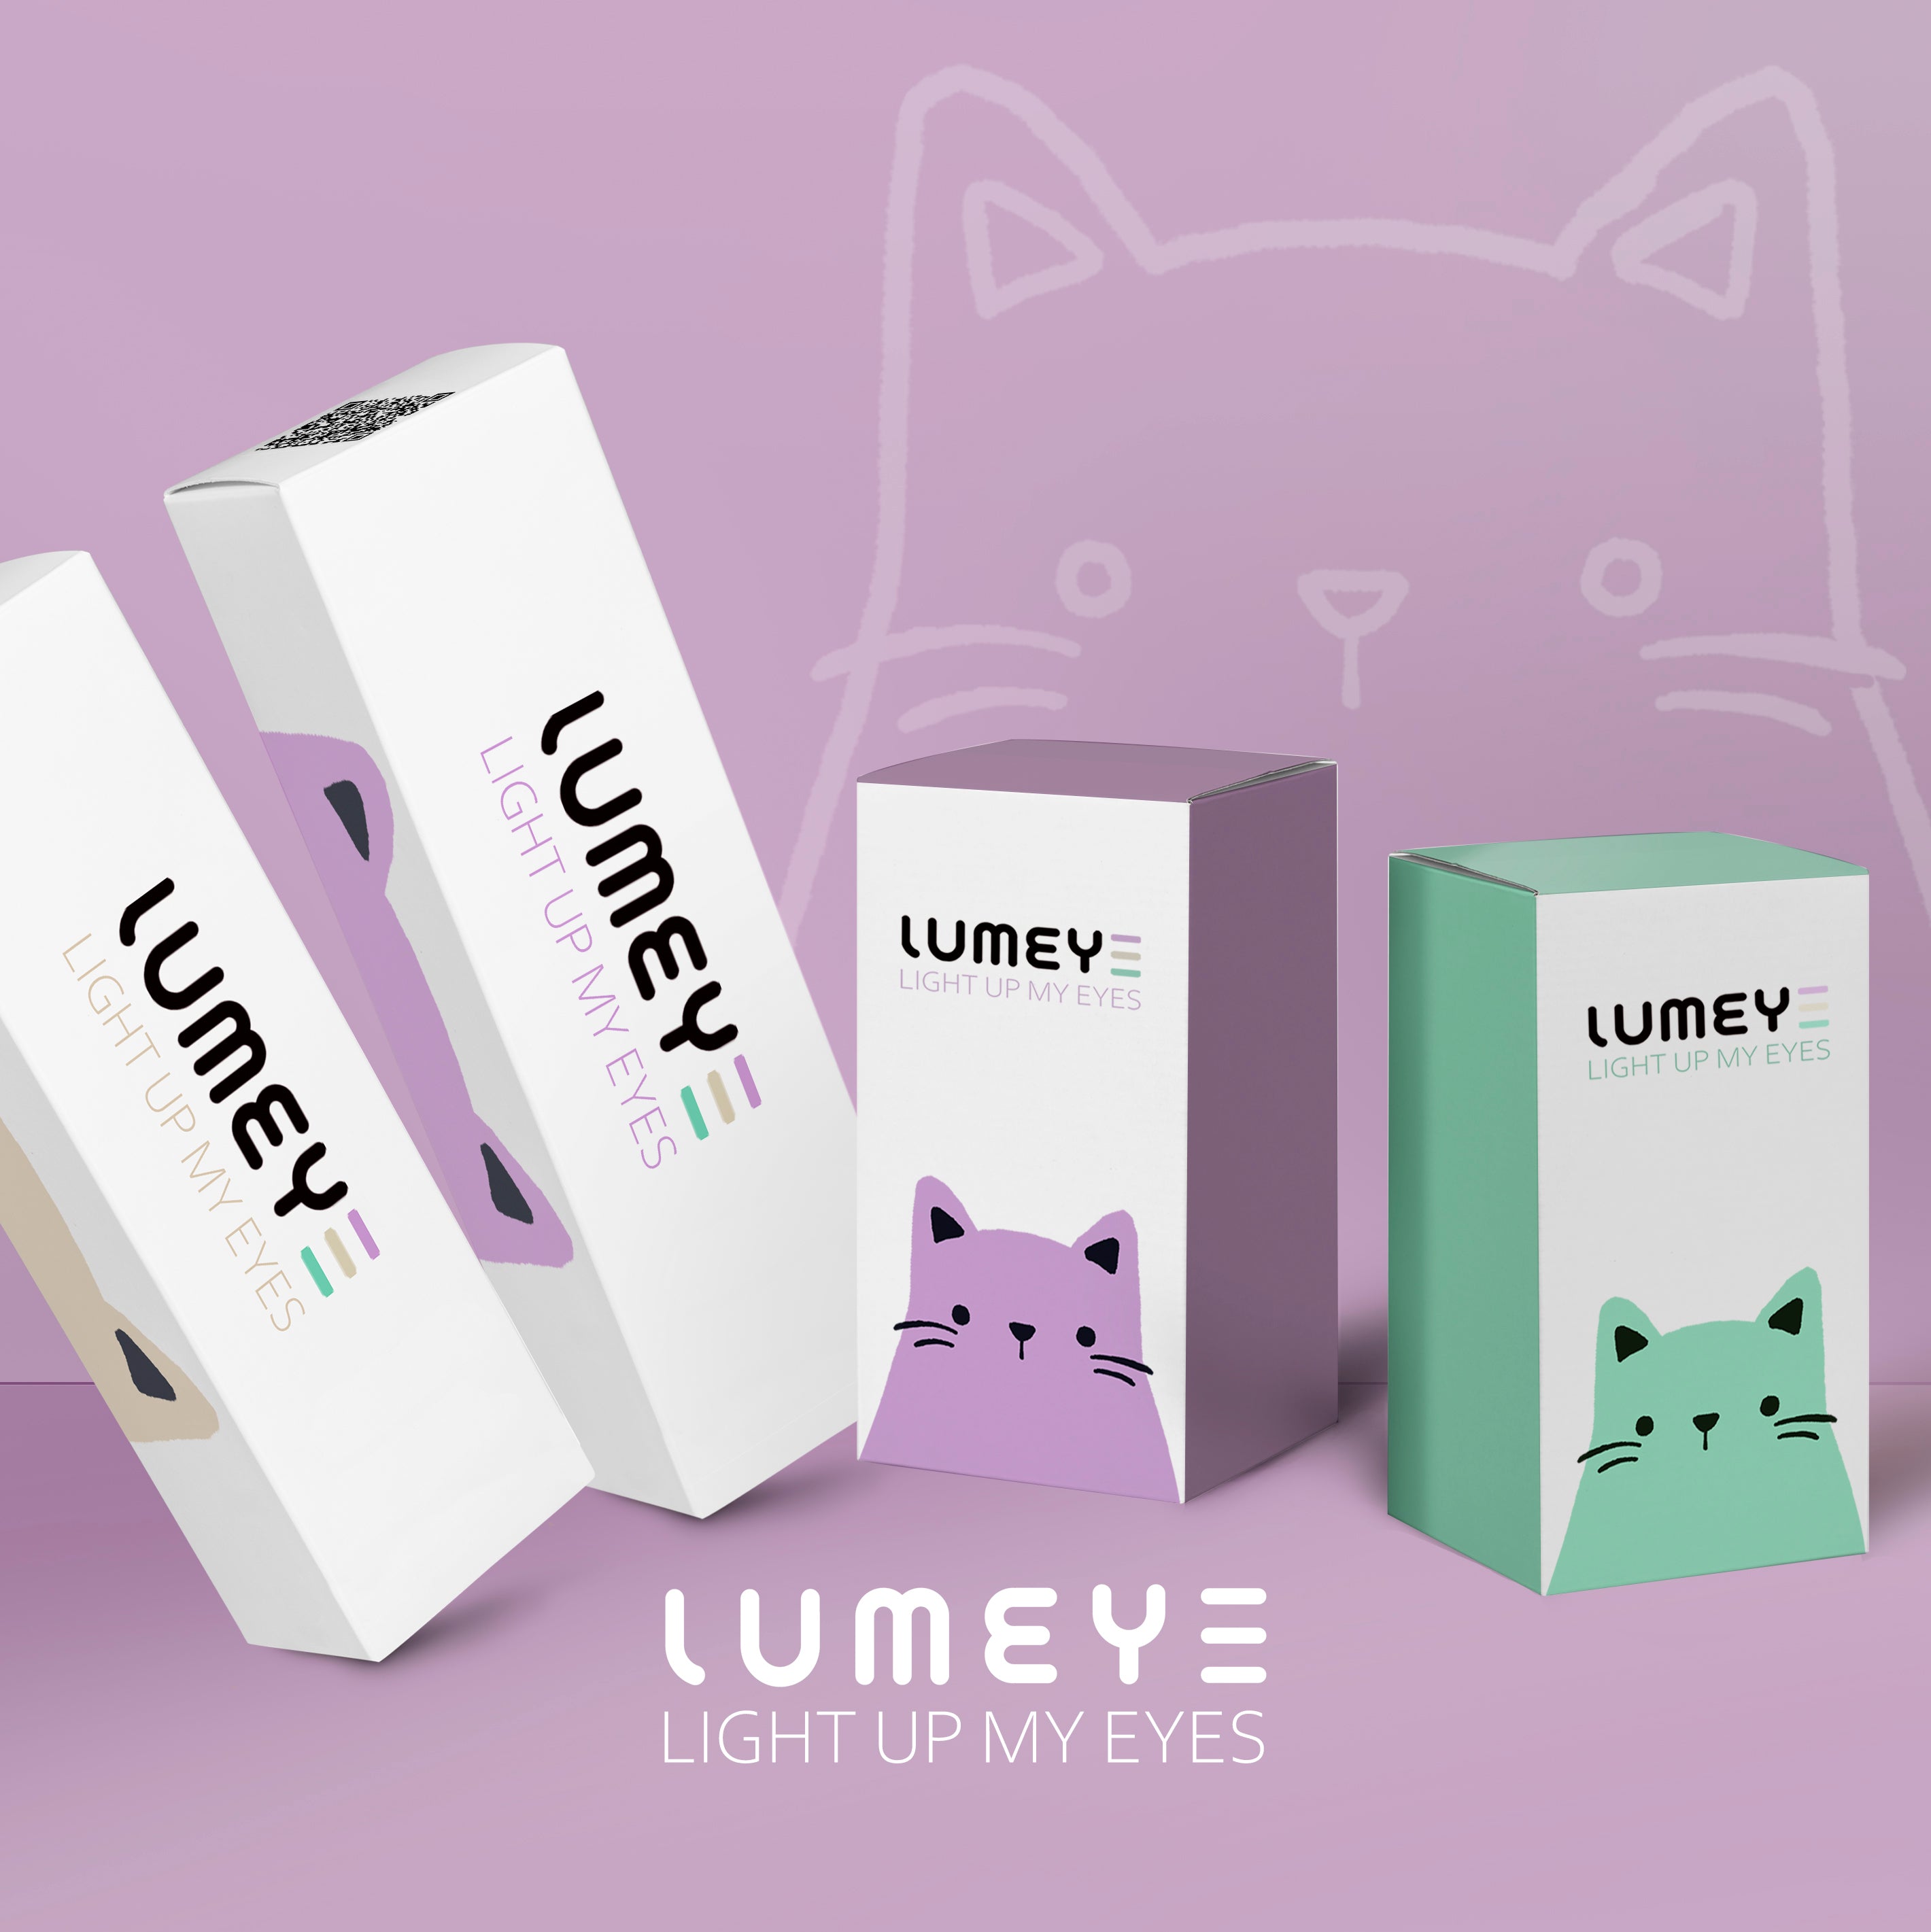 Best COLORED CONTACTS - LUMEYE Pop Star Gray Colored Contact Lenses - LUMEYE